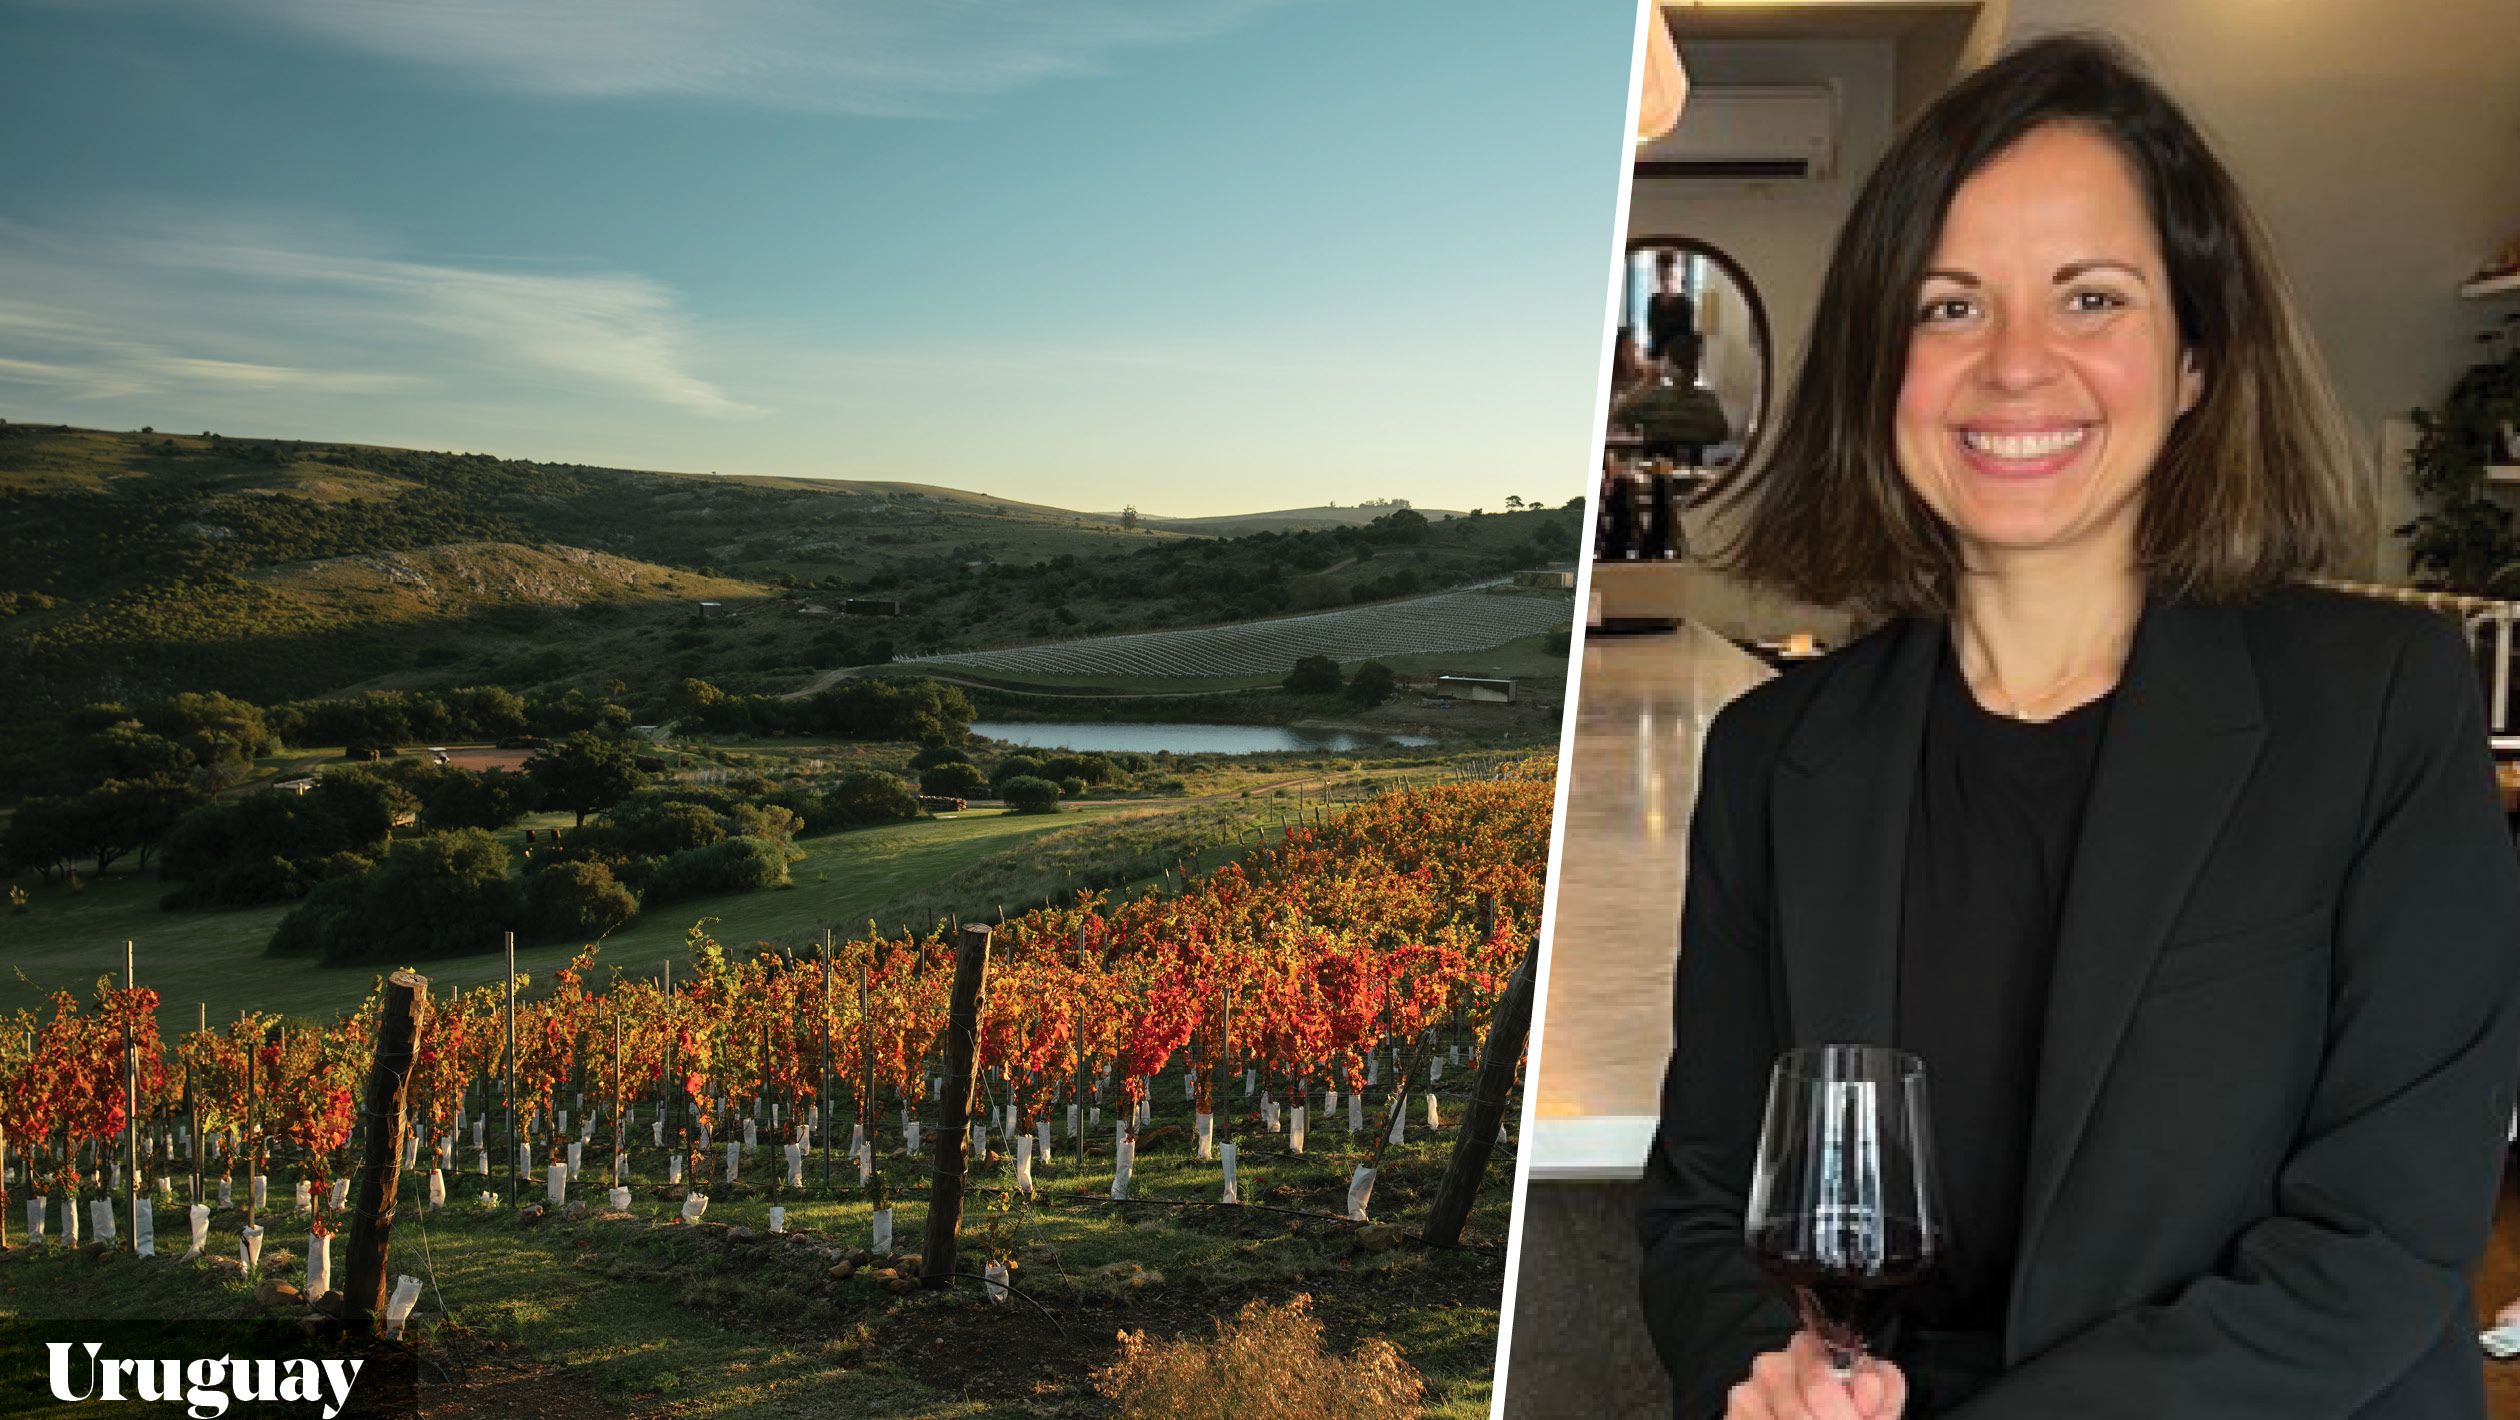 From left to right: vineyards of Uruguay (photo courtesy of Wines of Uruguay); Gabriela Davogustto, the wine director of Clay (photo courtesy of Clay).